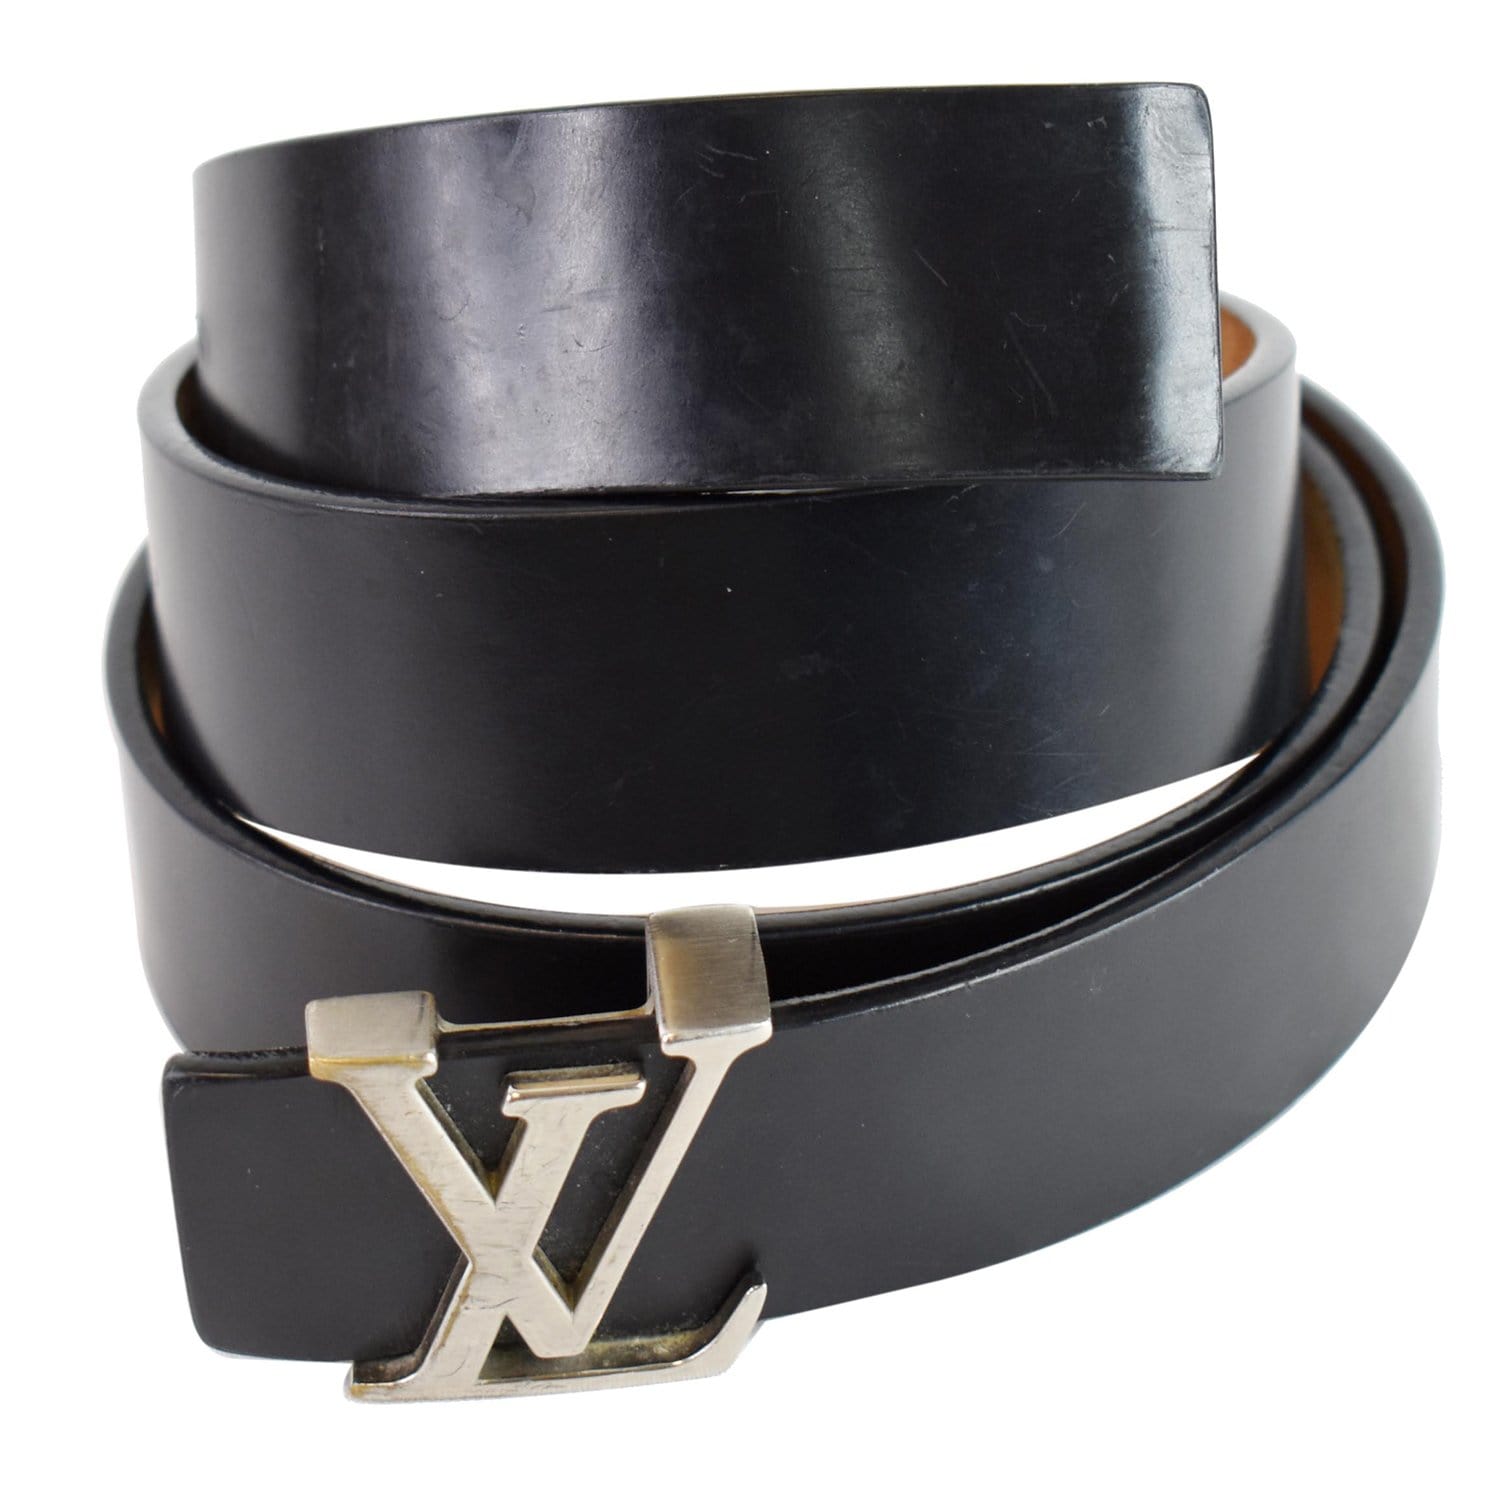 lv belt on person